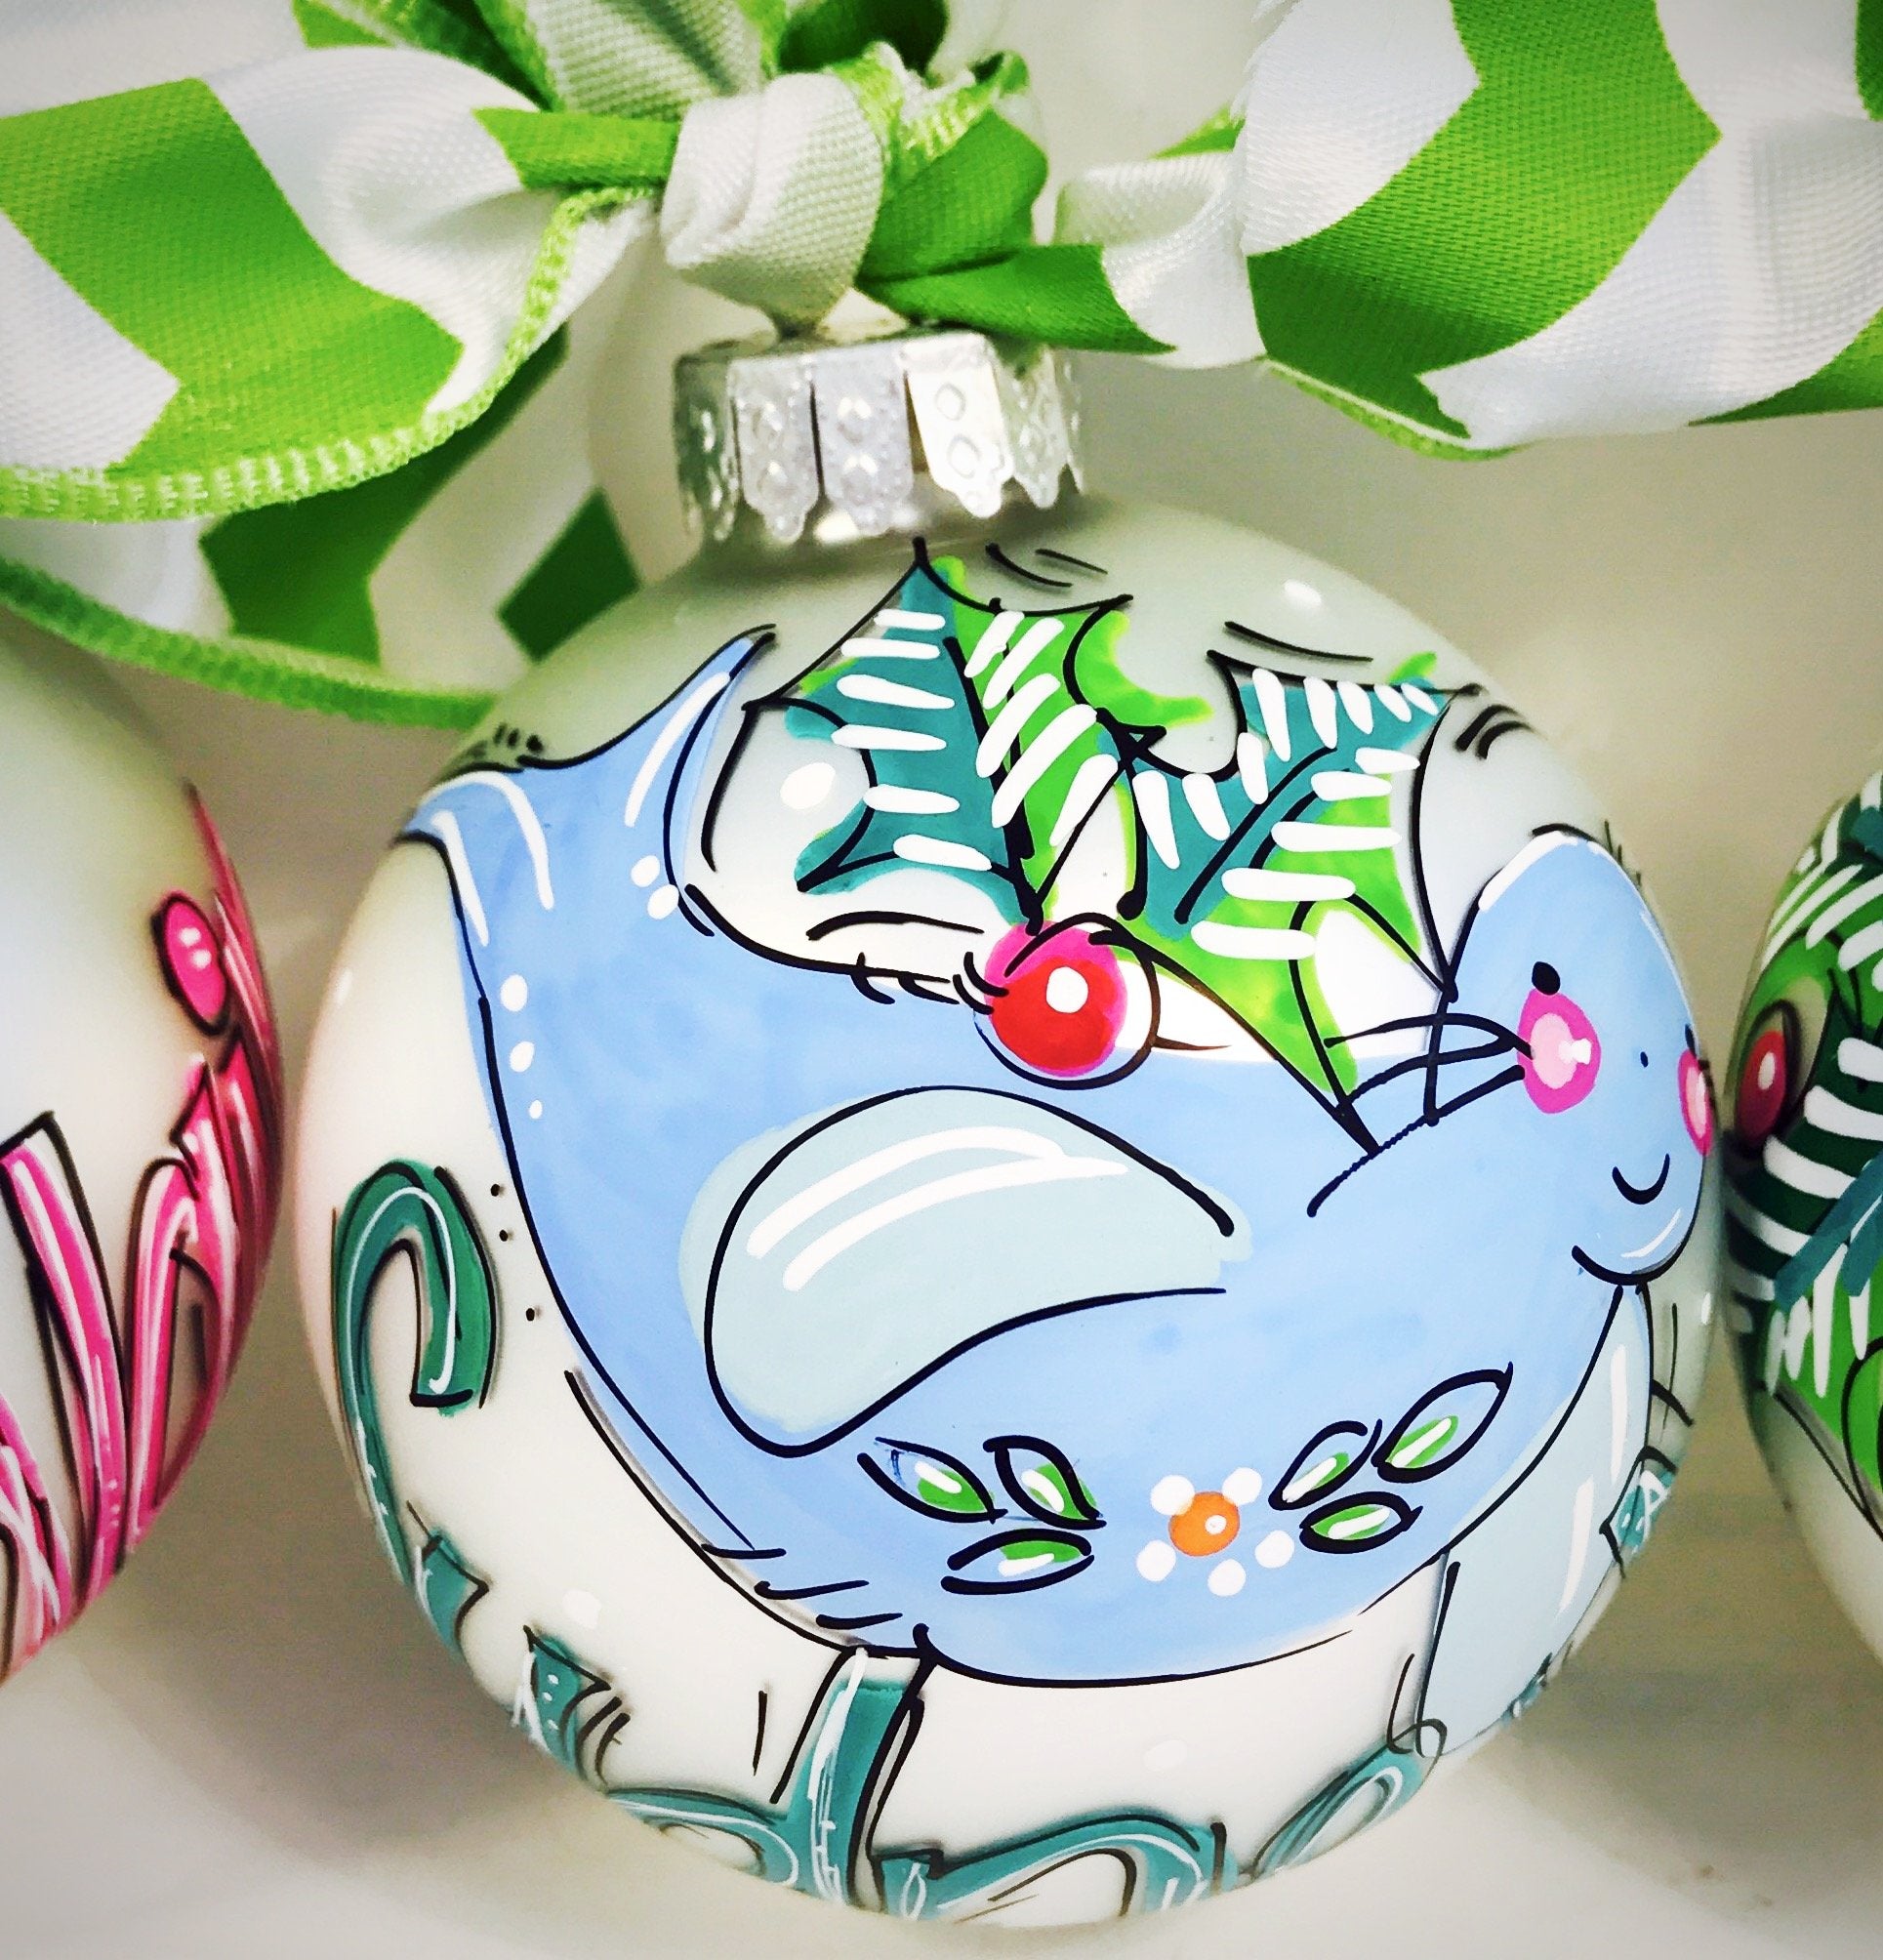 Orders Placed after 11/17 will Arrive after Christmas. ORNAMENT, PERSONALIZED SEAL Ornament